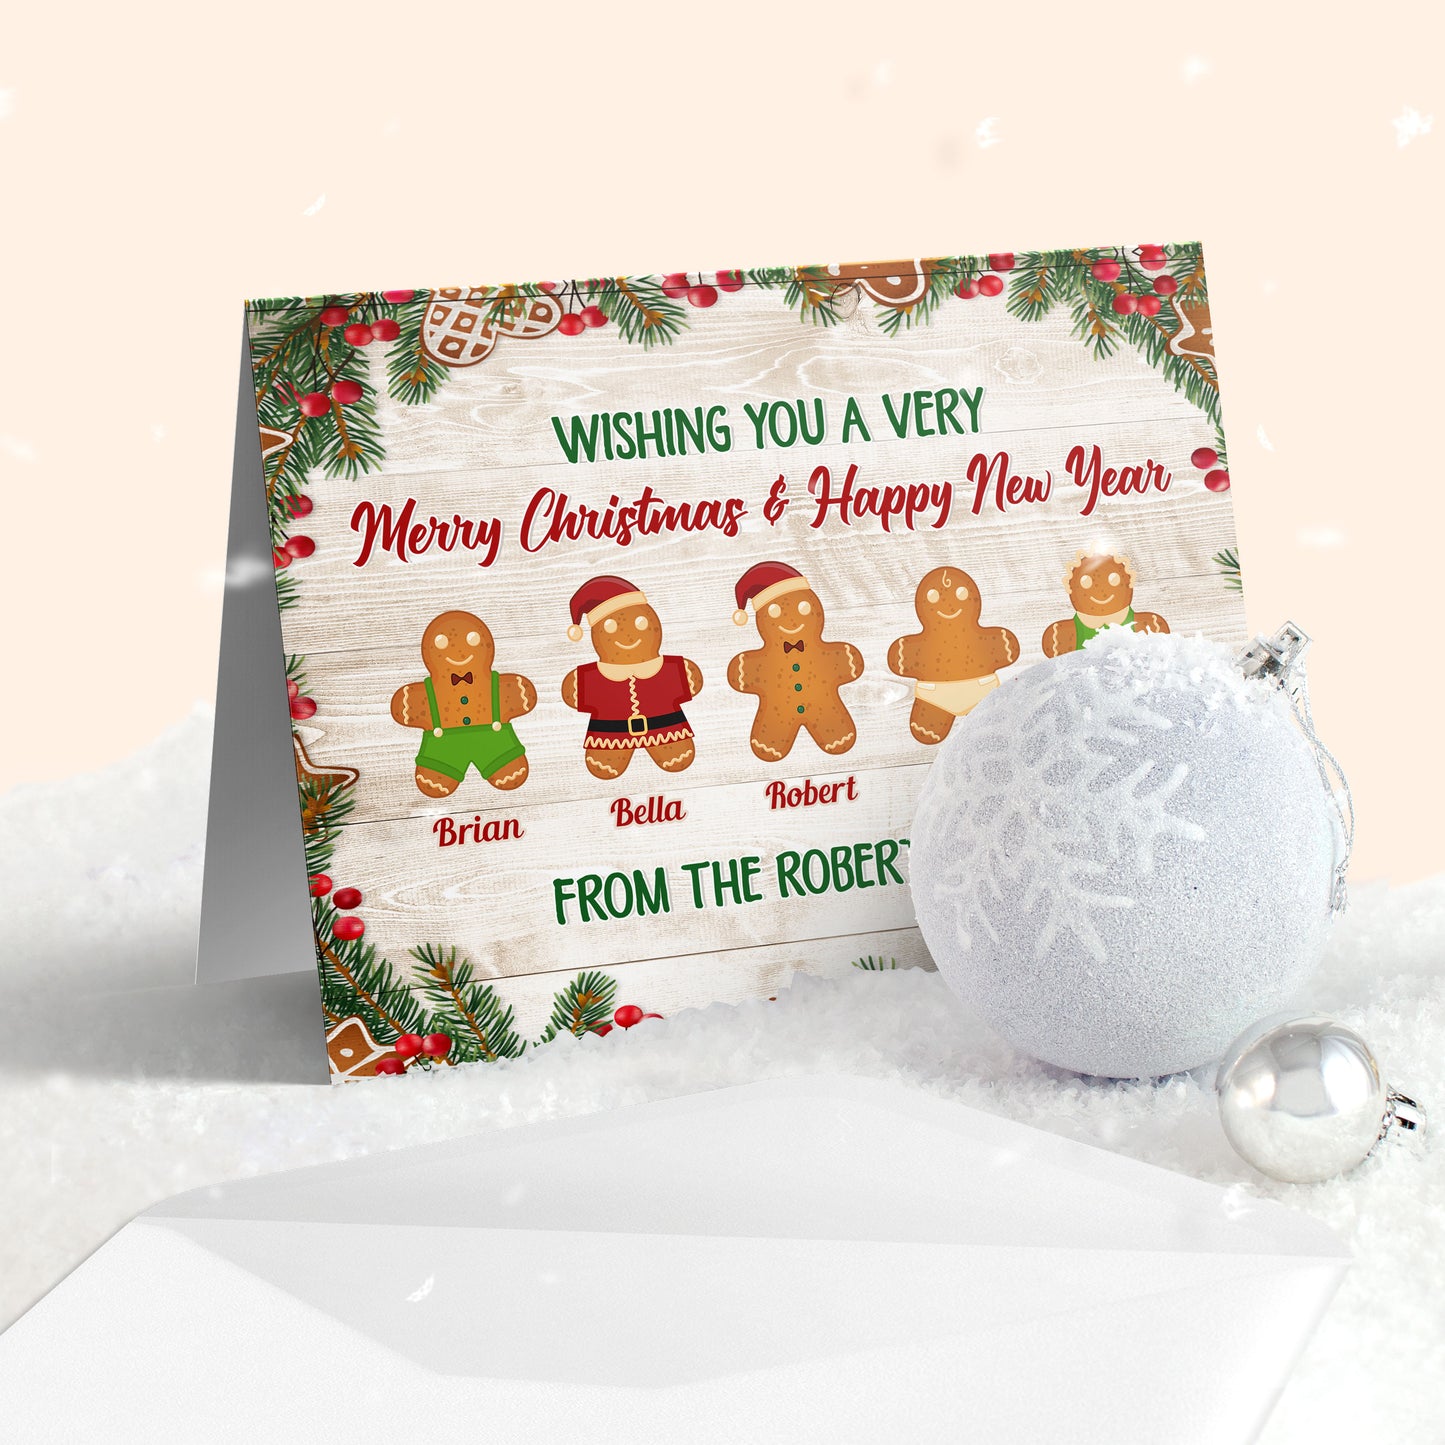 There's No Place Like Home For The Holidays - Personalized Folded Card - Christmas Gift For Family, Friends, Love Ones - Gingerbreads